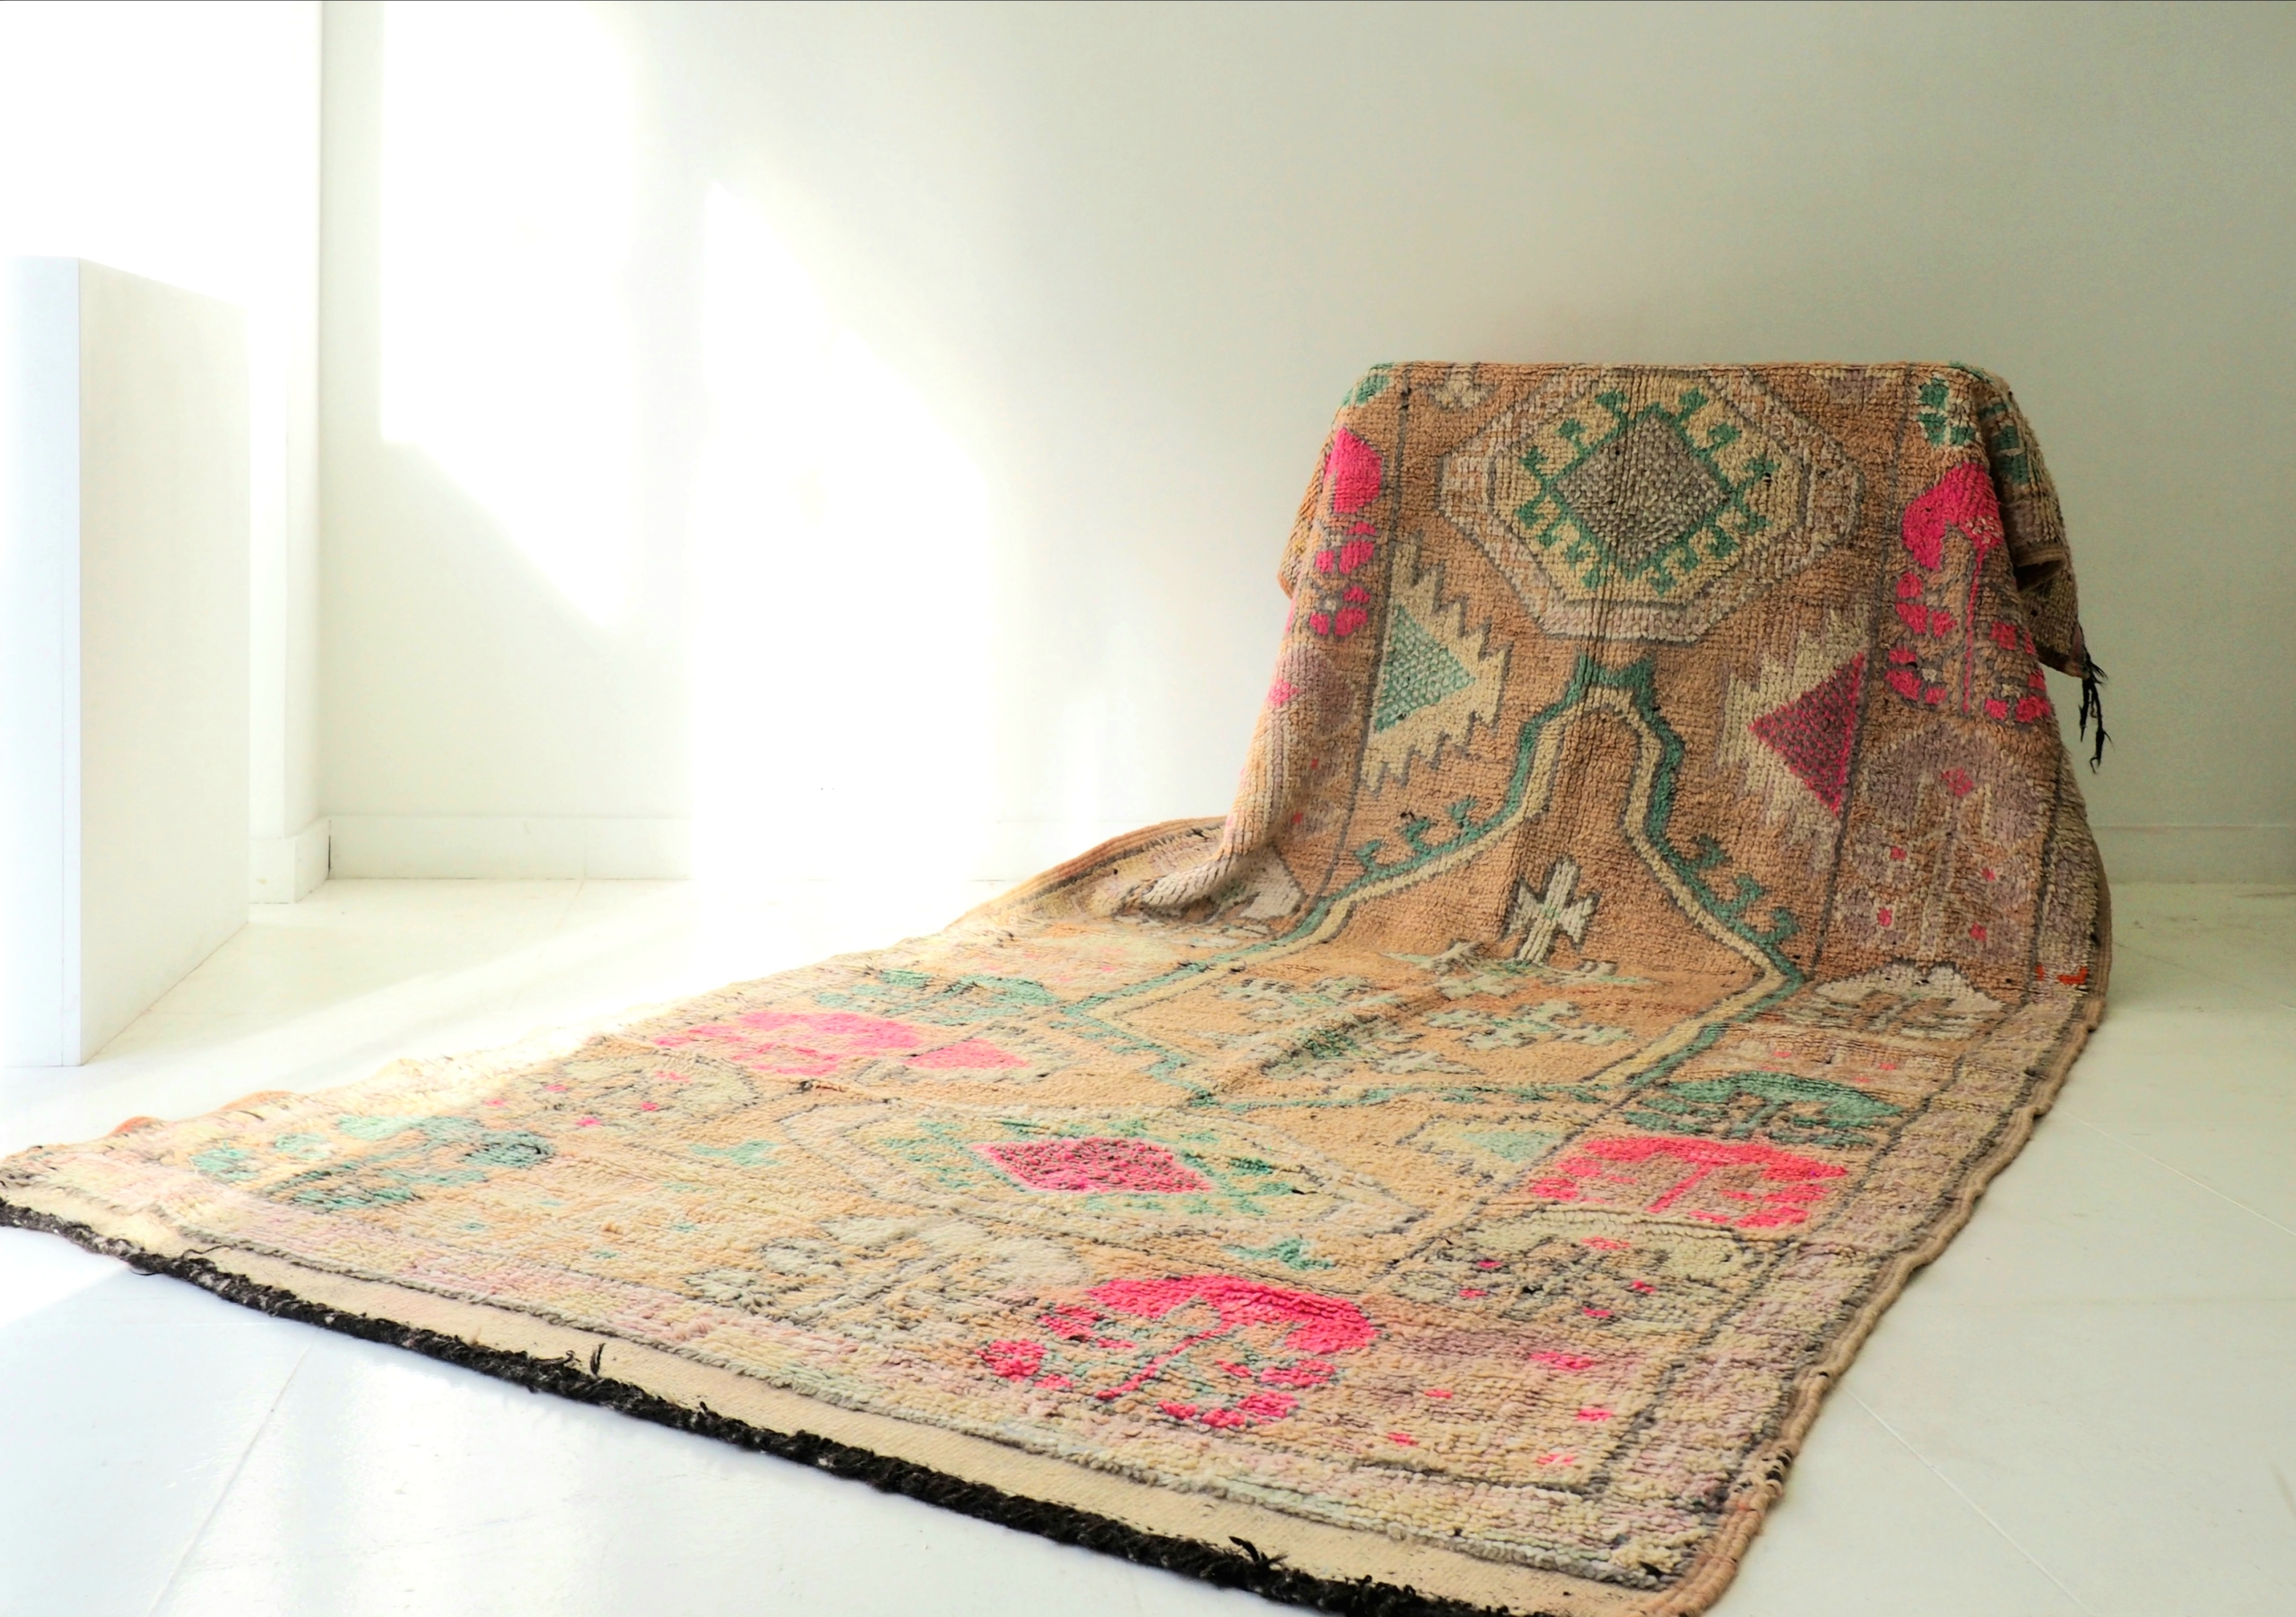 Authentic Berber Moroccan vintage pink and nude wool rug